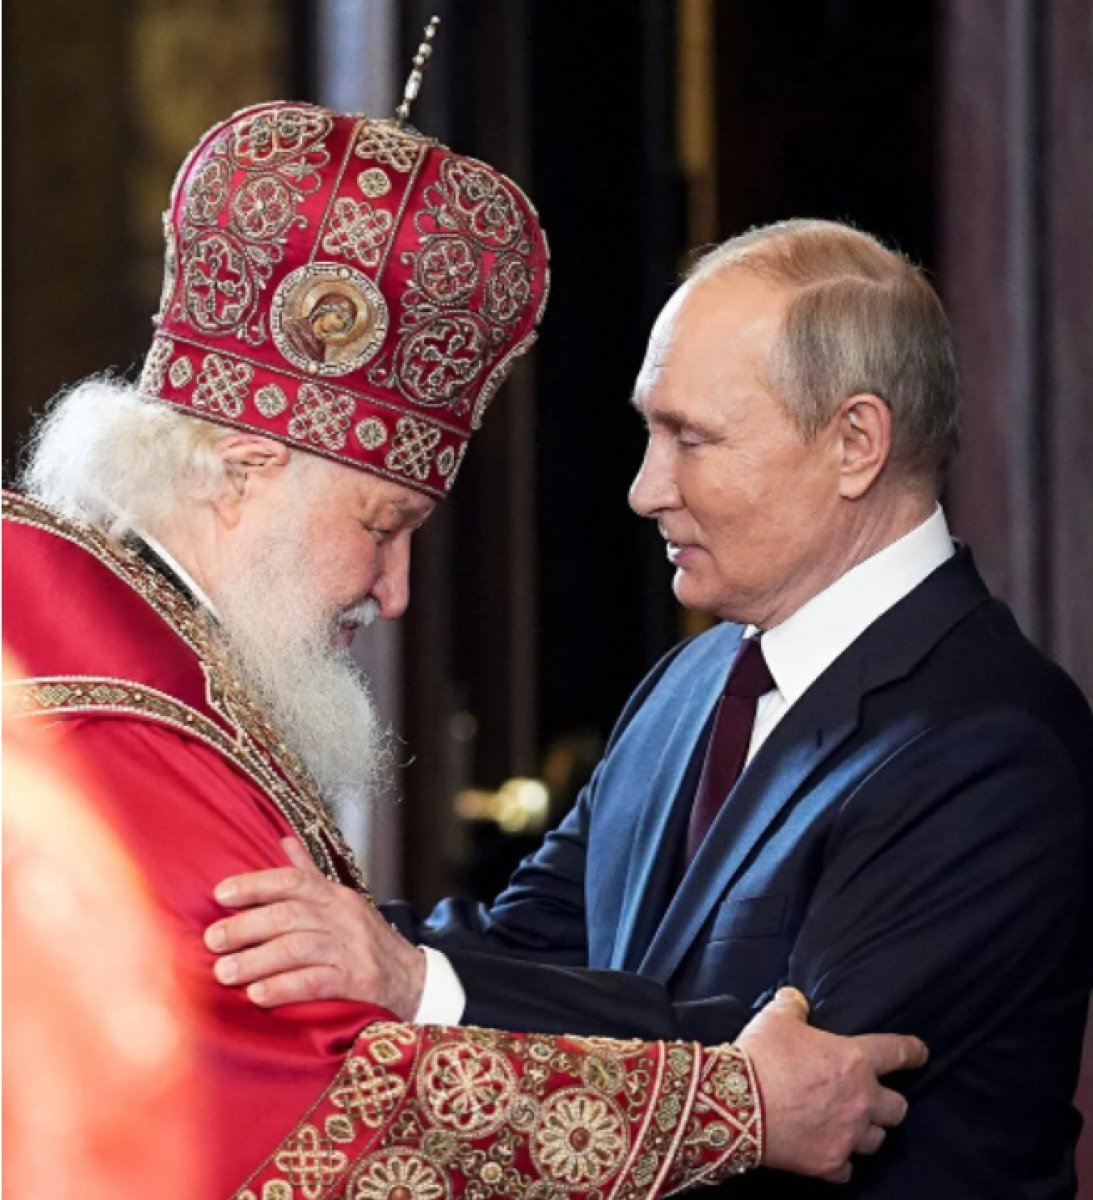 Sanction decision from EU to Russian Patriarch Kirill #2